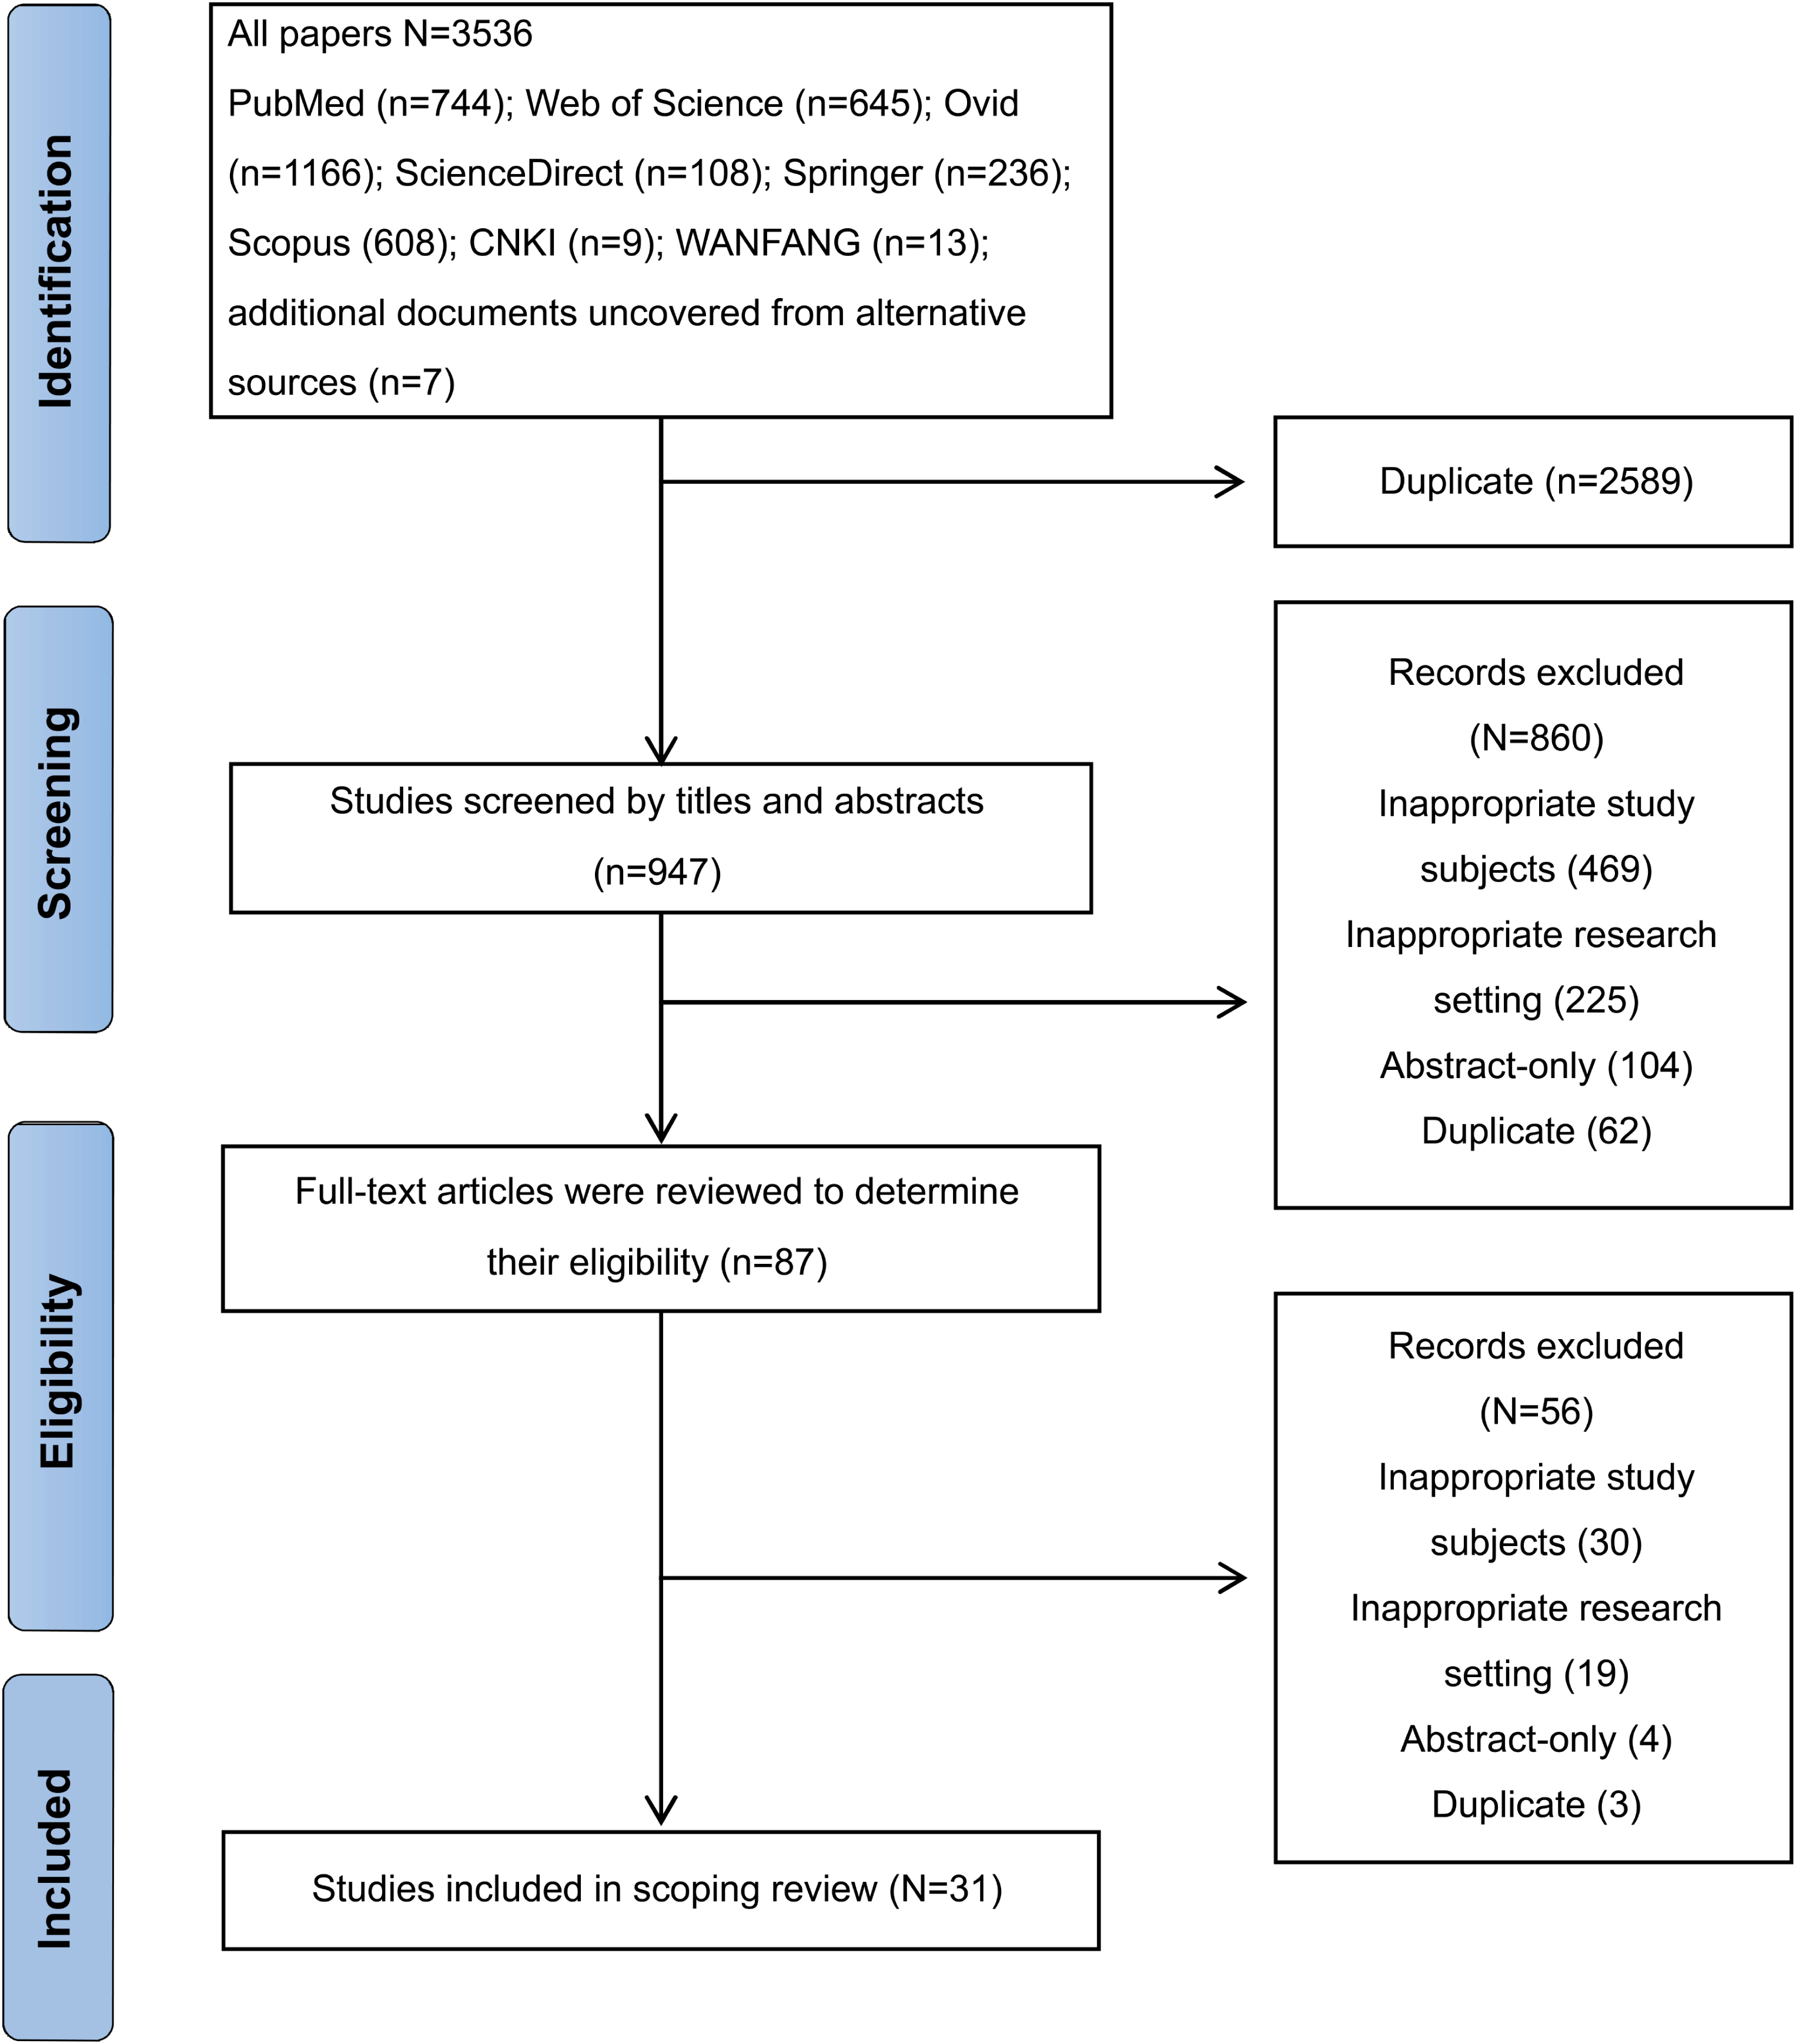 Post-traumatic stress disorder in children after discharge from the pediatric intensive care unit: a scoping review